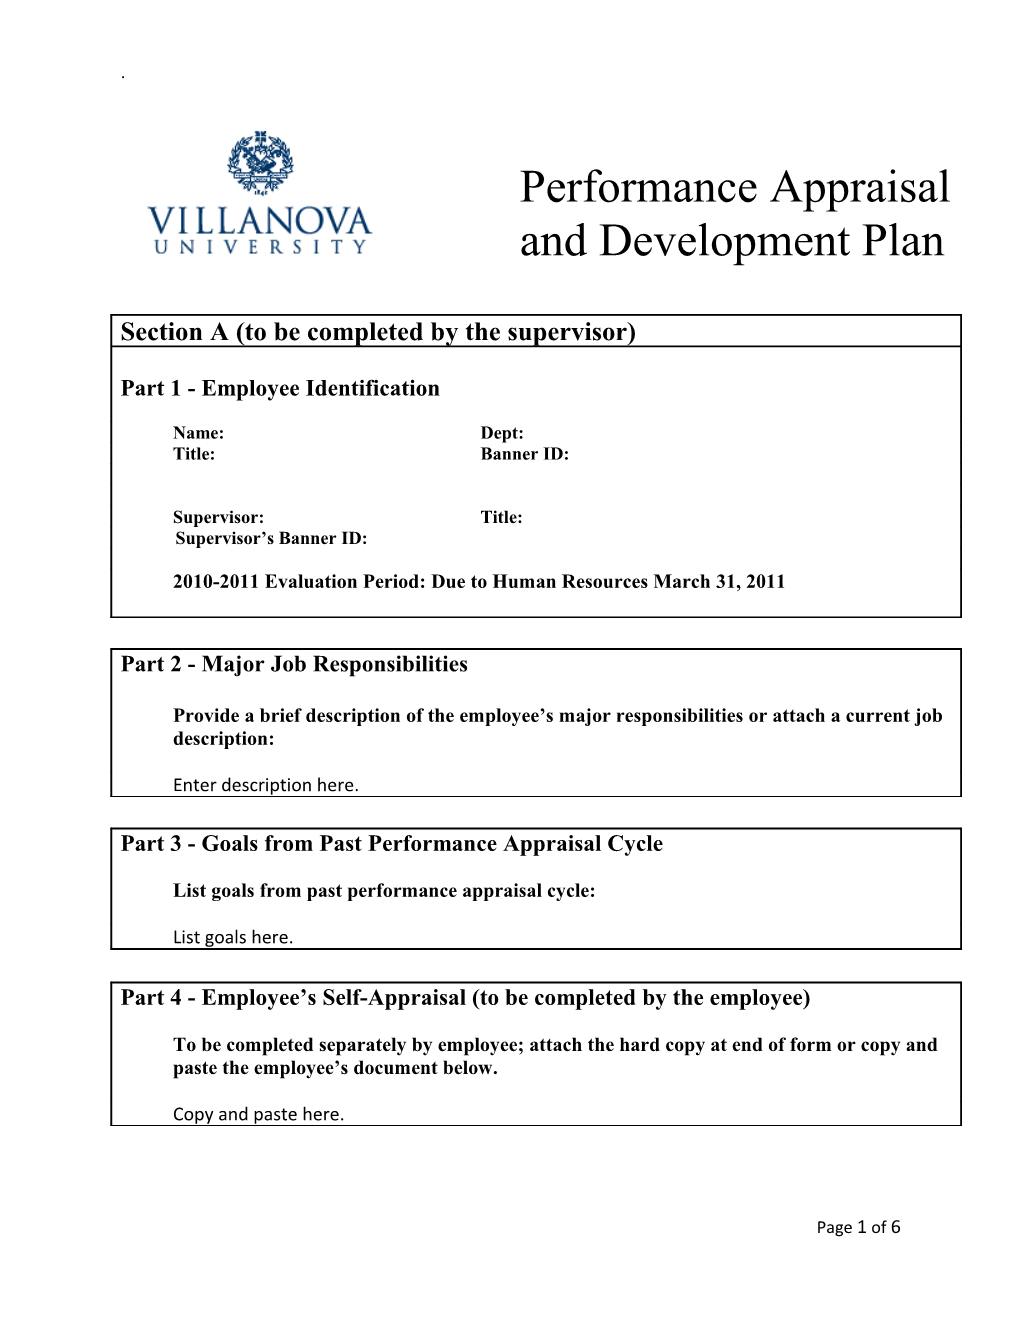 Part 3 - Goals from Past Performance Appraisal Cycle